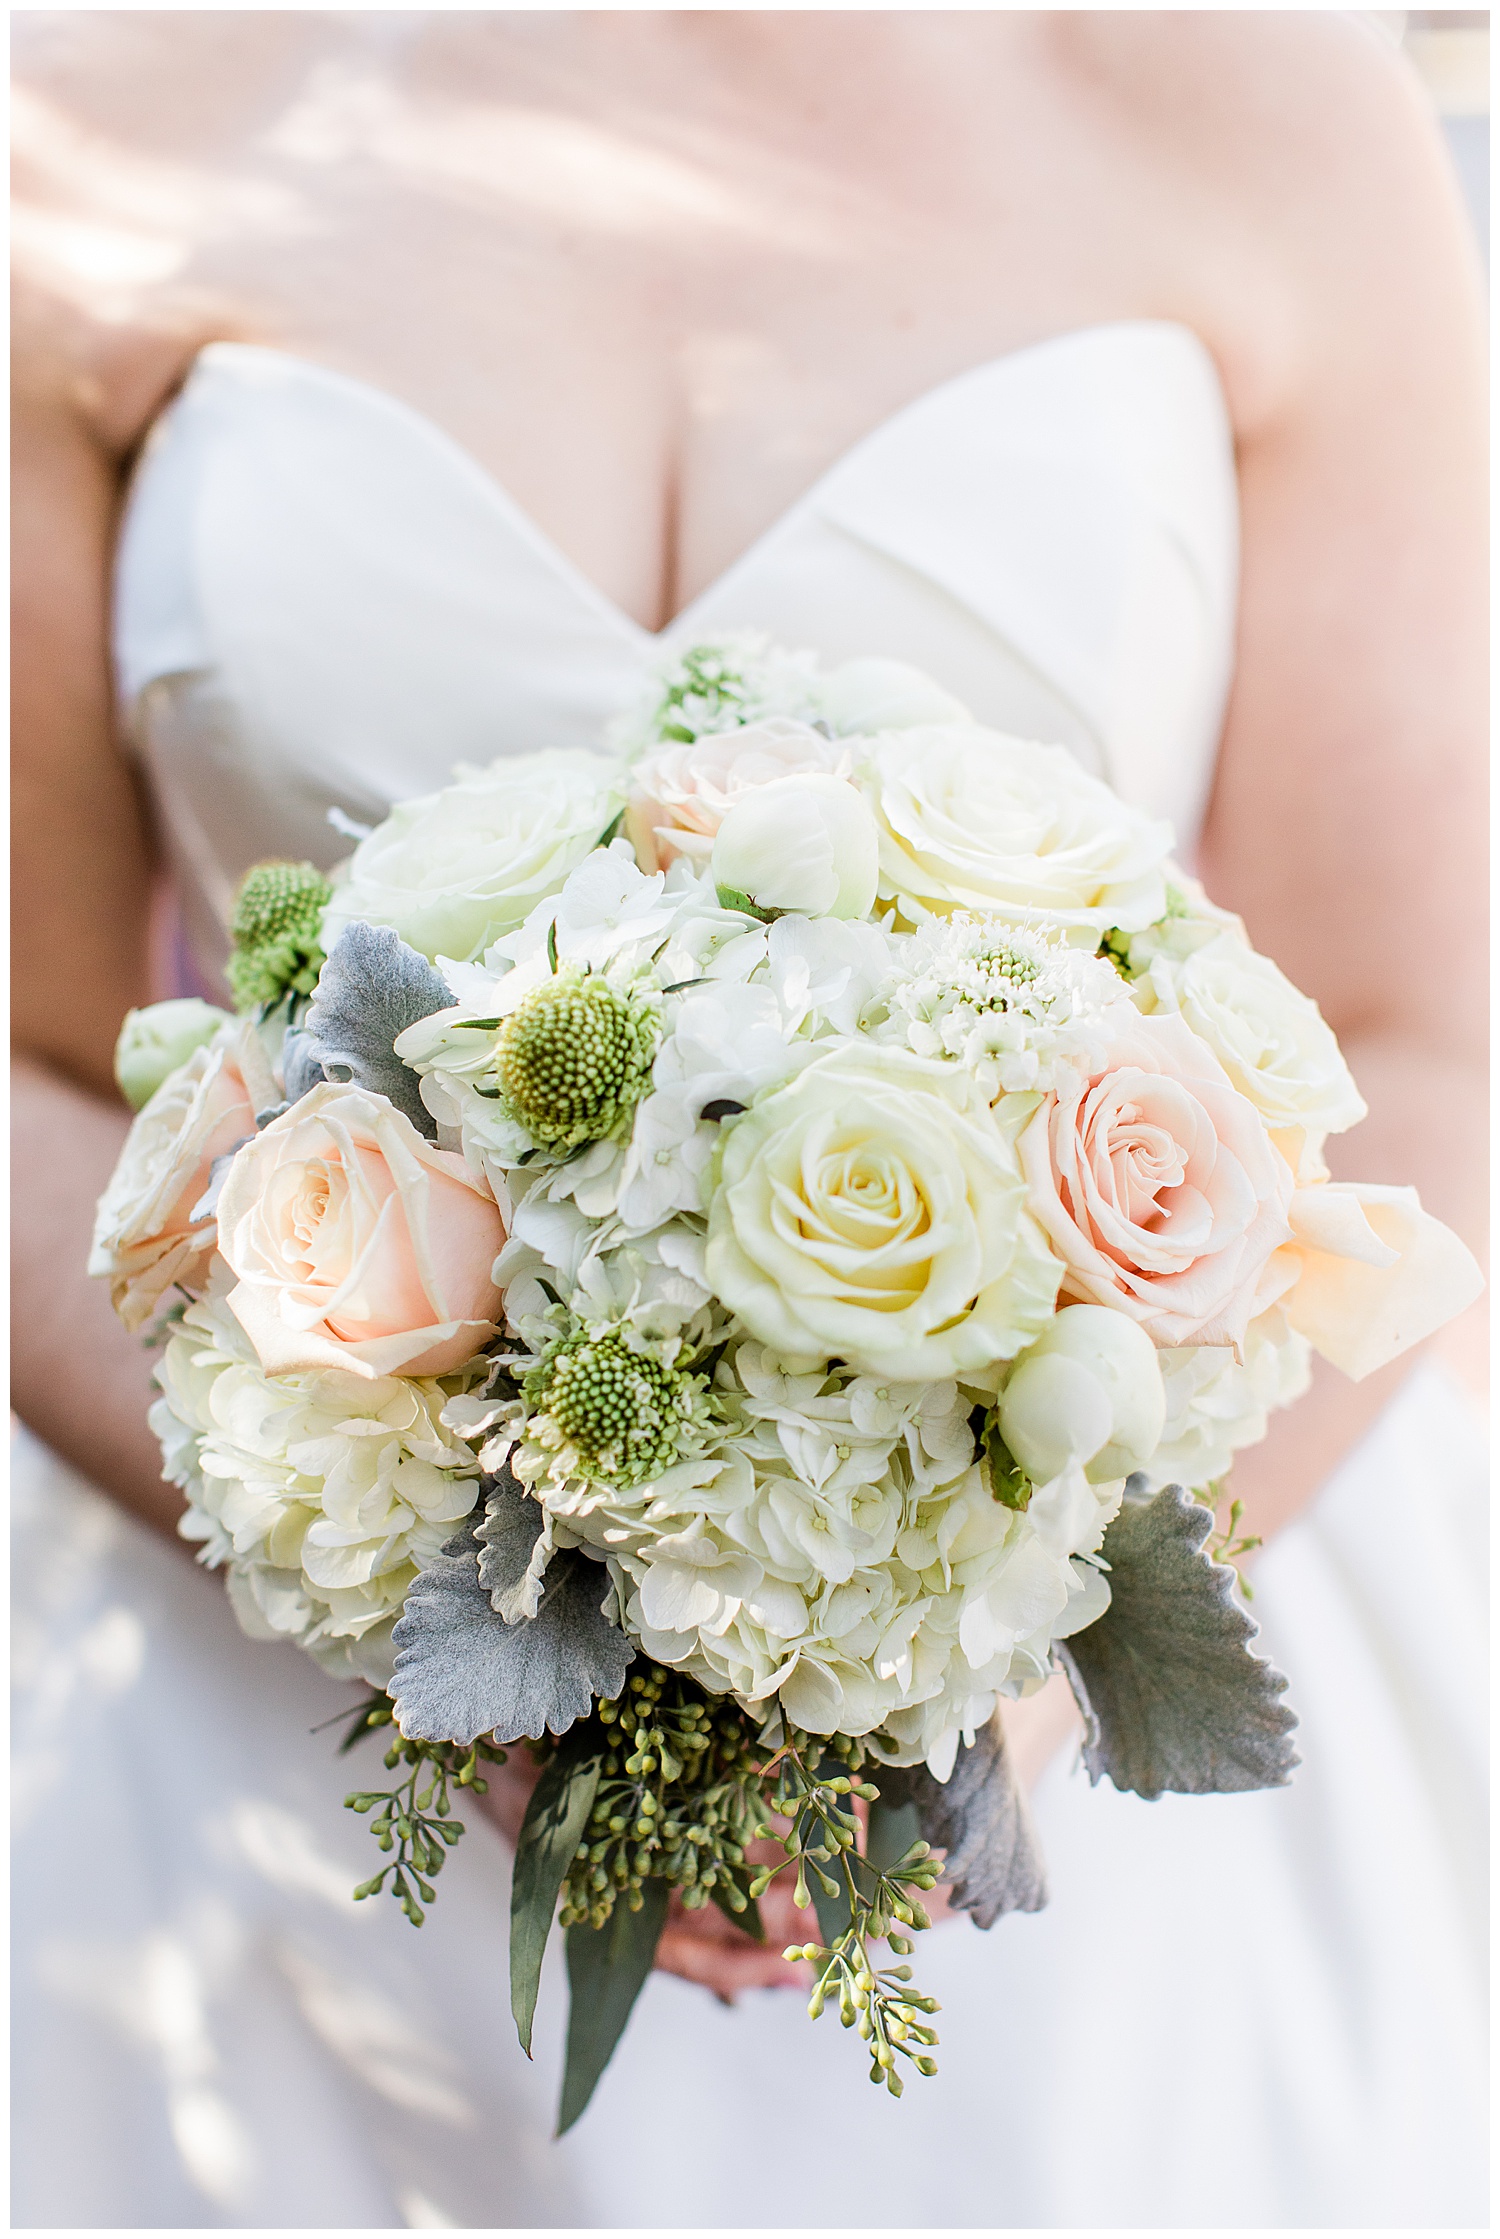 Soft white and pink wedding bouquet